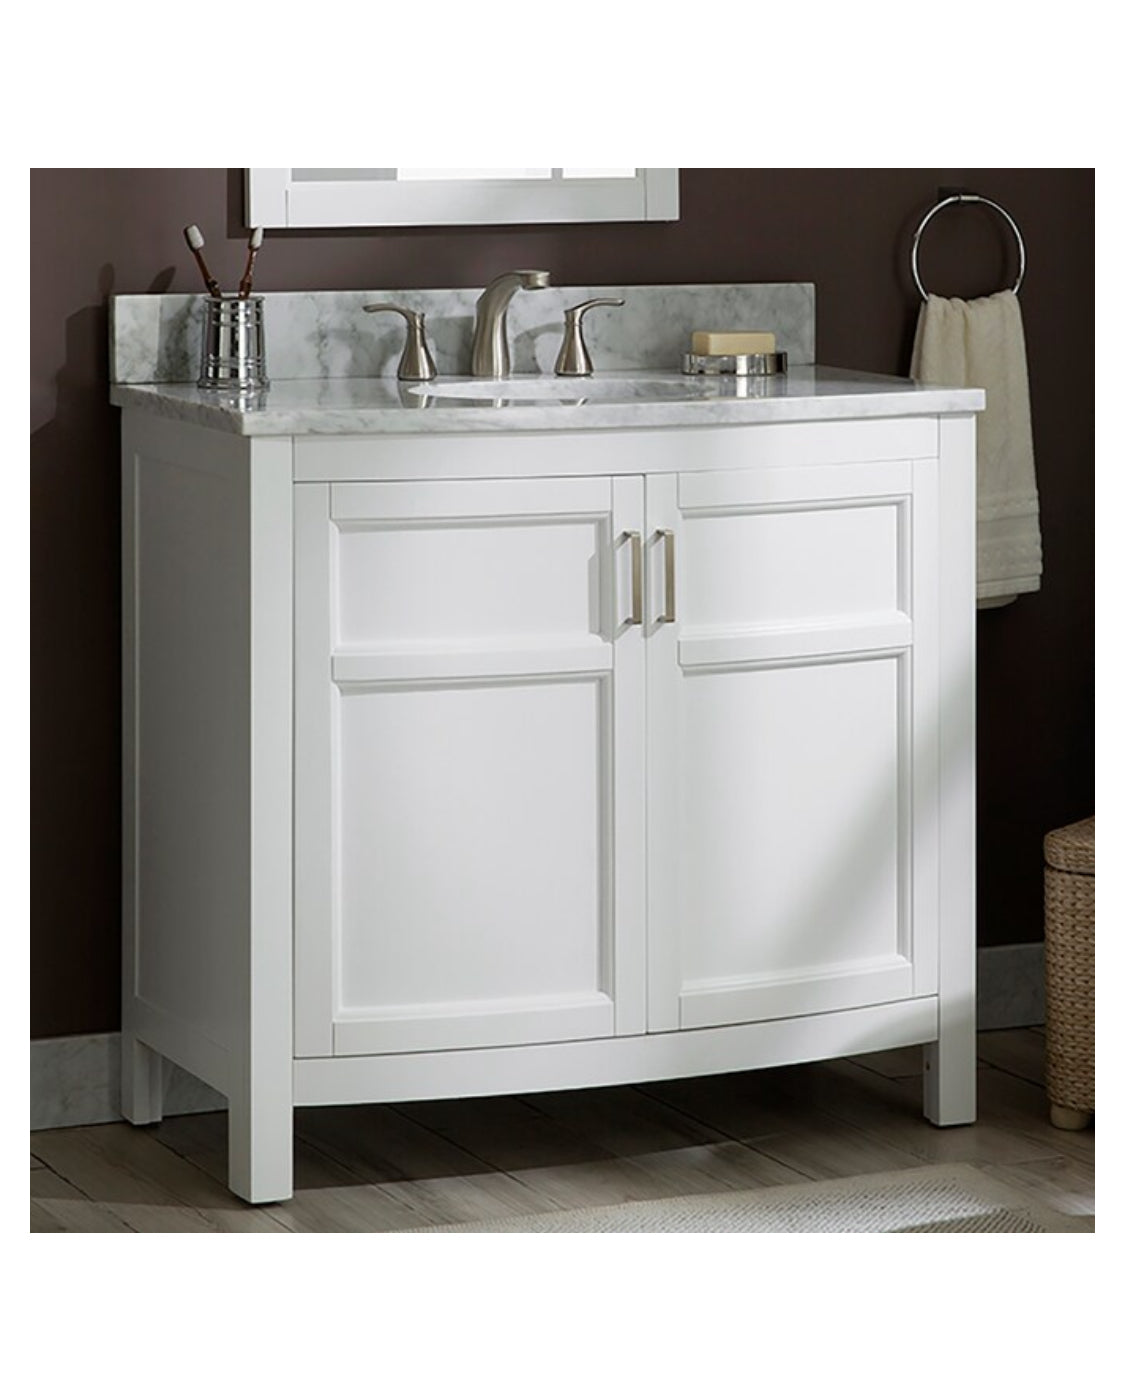 allen + roth Moravia 36-in White Undermount Single Sink Bathroom Vanity with Natural Carrara Marble Top